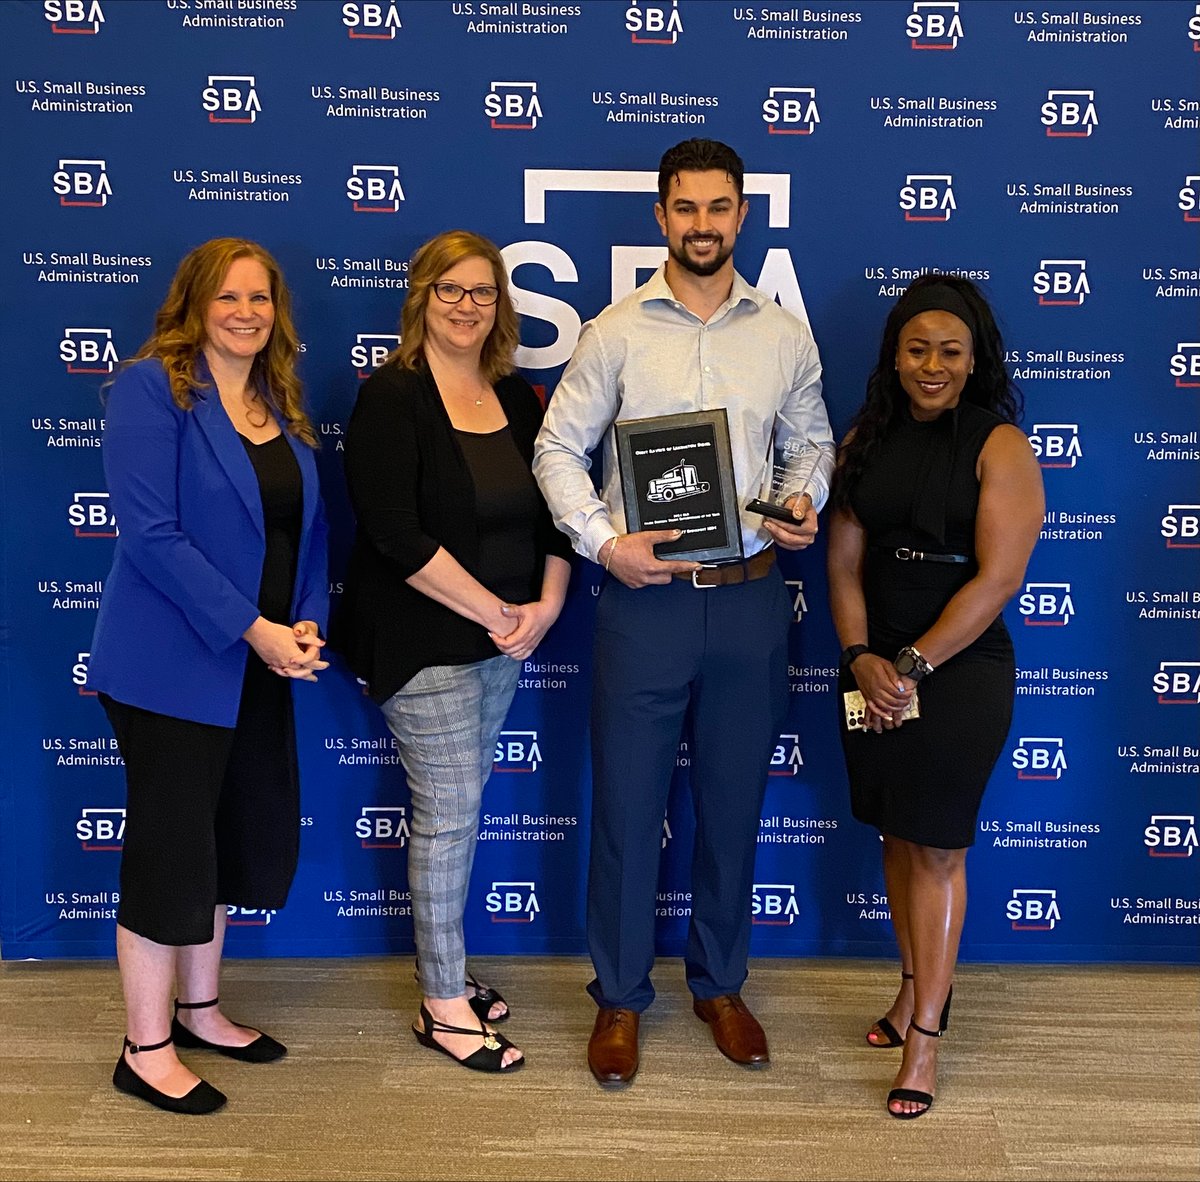 Huge congratulations to Orest Ravlyk, the driving force behind Lexington Diesel, Inc.! Winning not just one but TWO prestigious awards — the SBA and SUNY Brockport SBDC accolades for Small Business Young Entrepreneur of the Year #SmallBusiness #entrepreneurship #SBA #SBDC